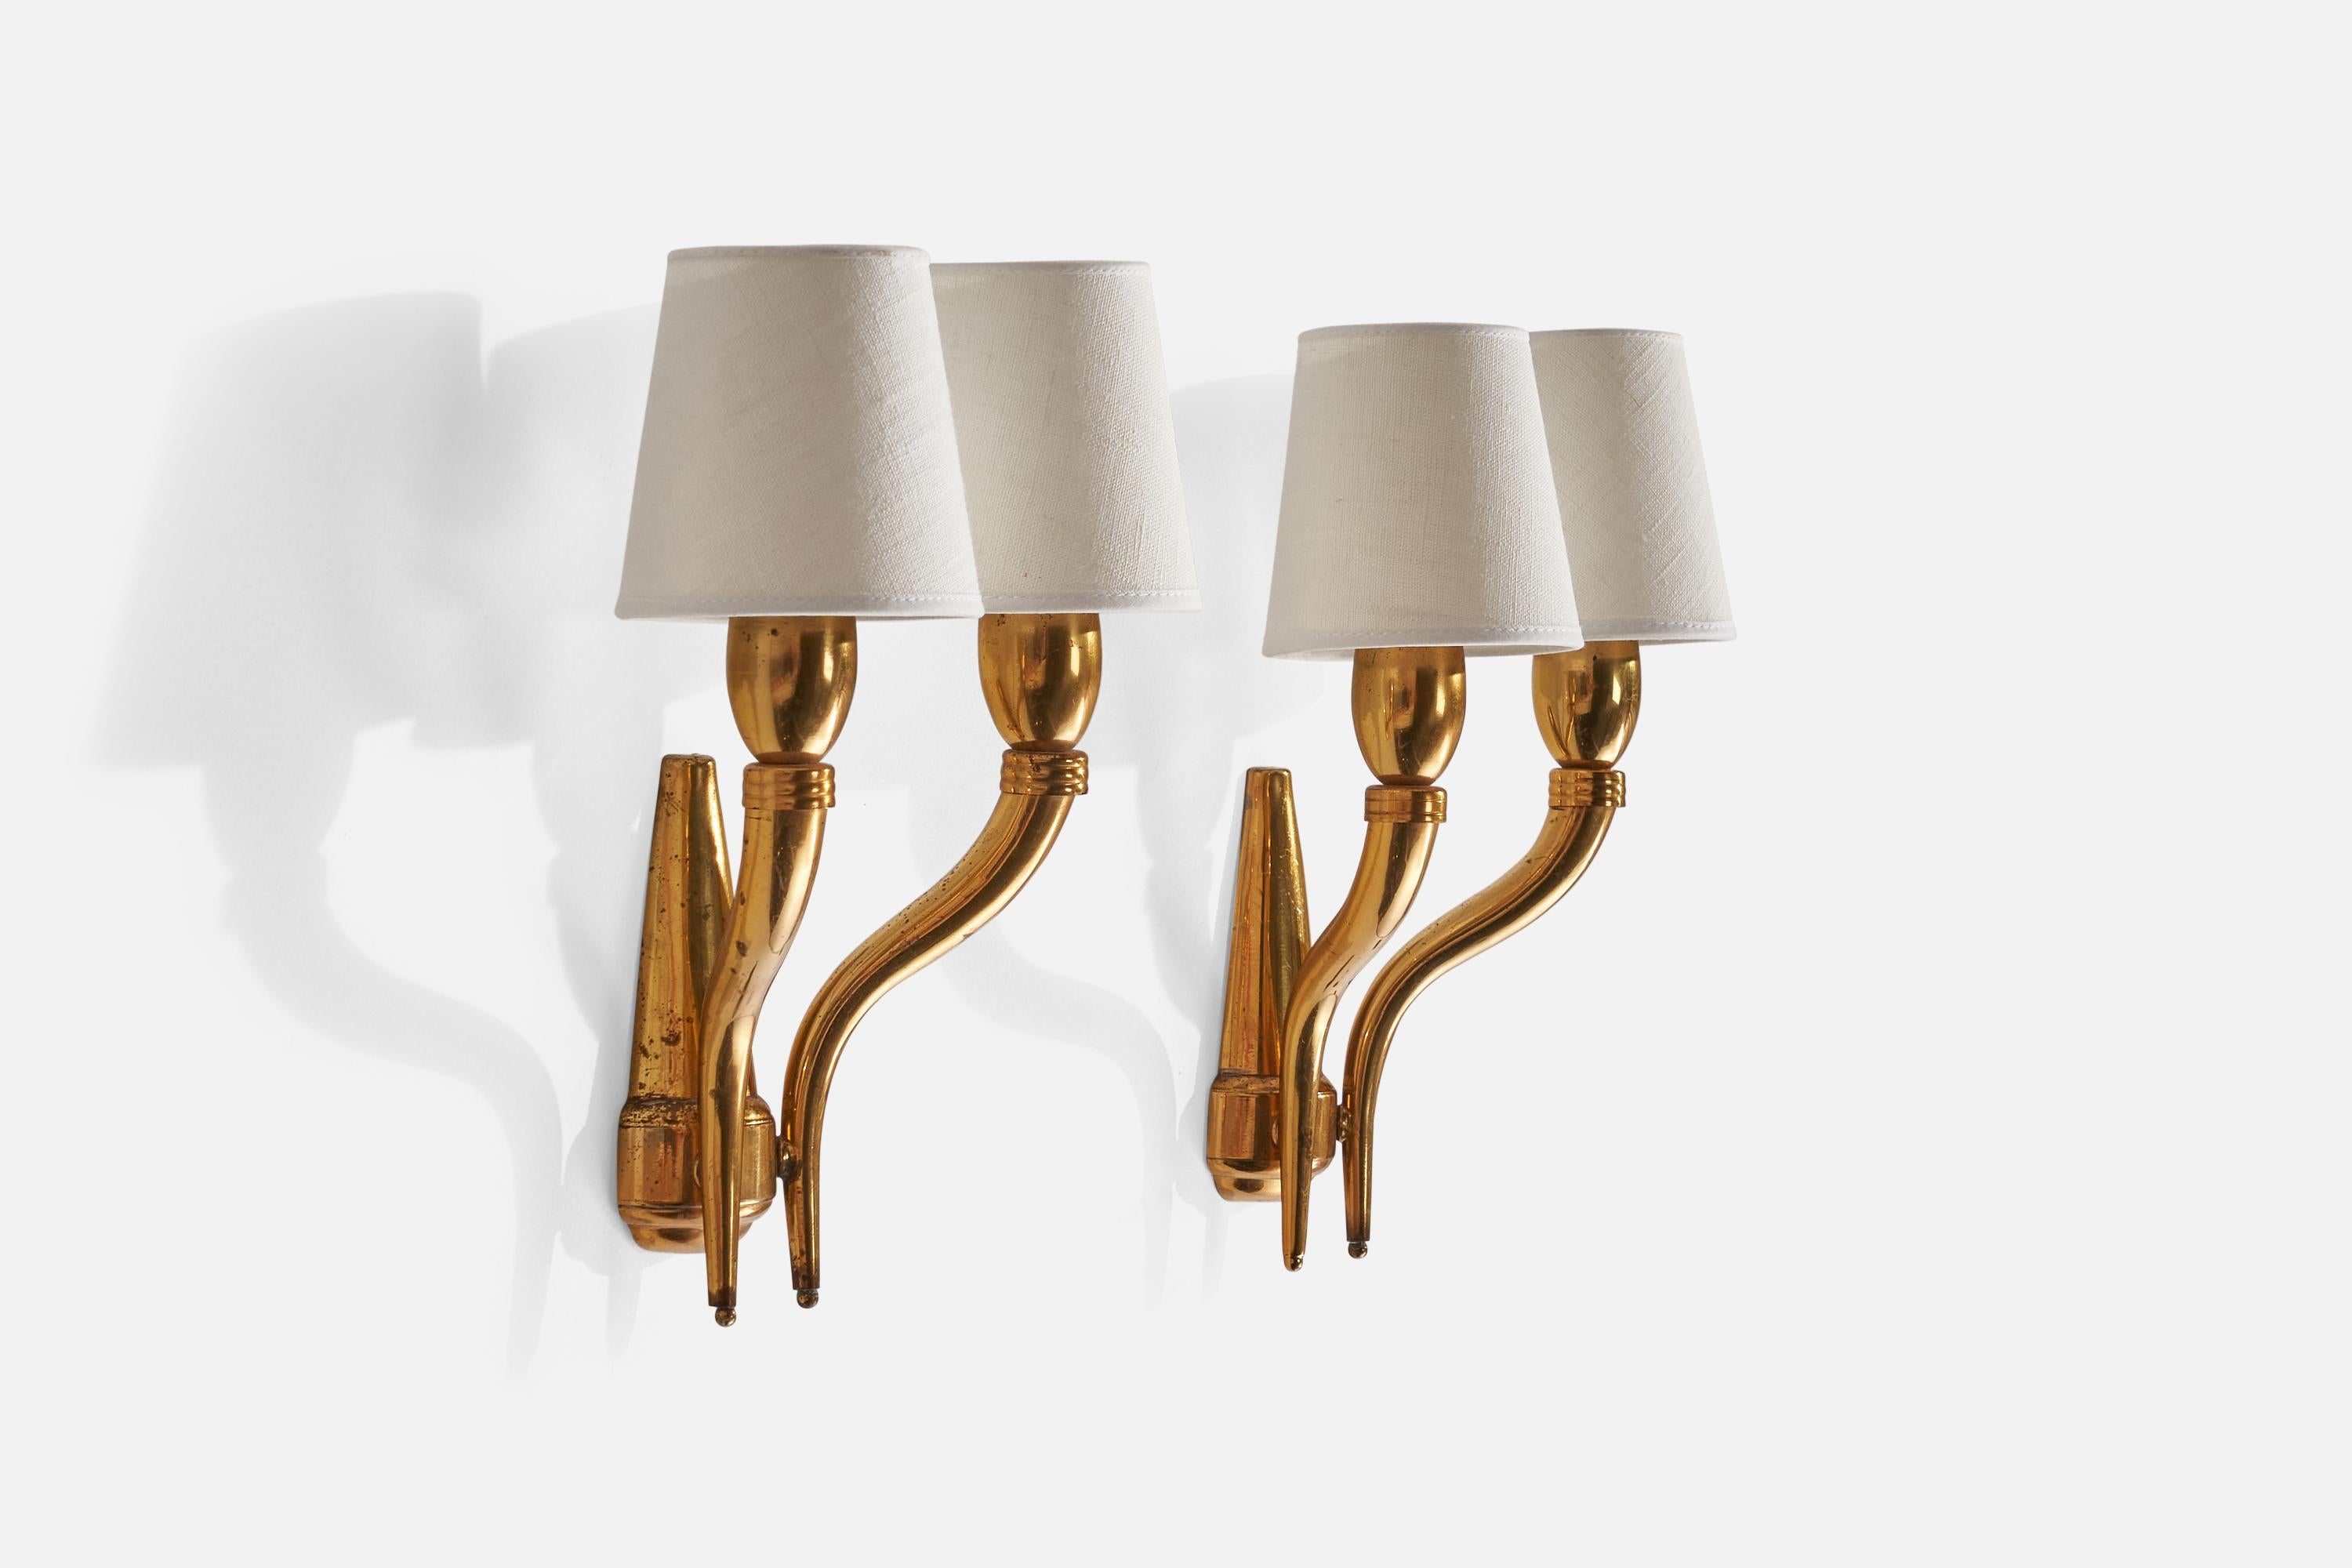 A pair of two-armed brass and white fabric wall lights designed and produced in Italy, 1930s.

Overall Dimensions (inches): 11.82” H x 9.45”  W x 5.32”D
Back Plate Dimensions (inches): 6” H x 2.50” W x 1” D
Bulb Specifications: E-14 Bulb
Number of